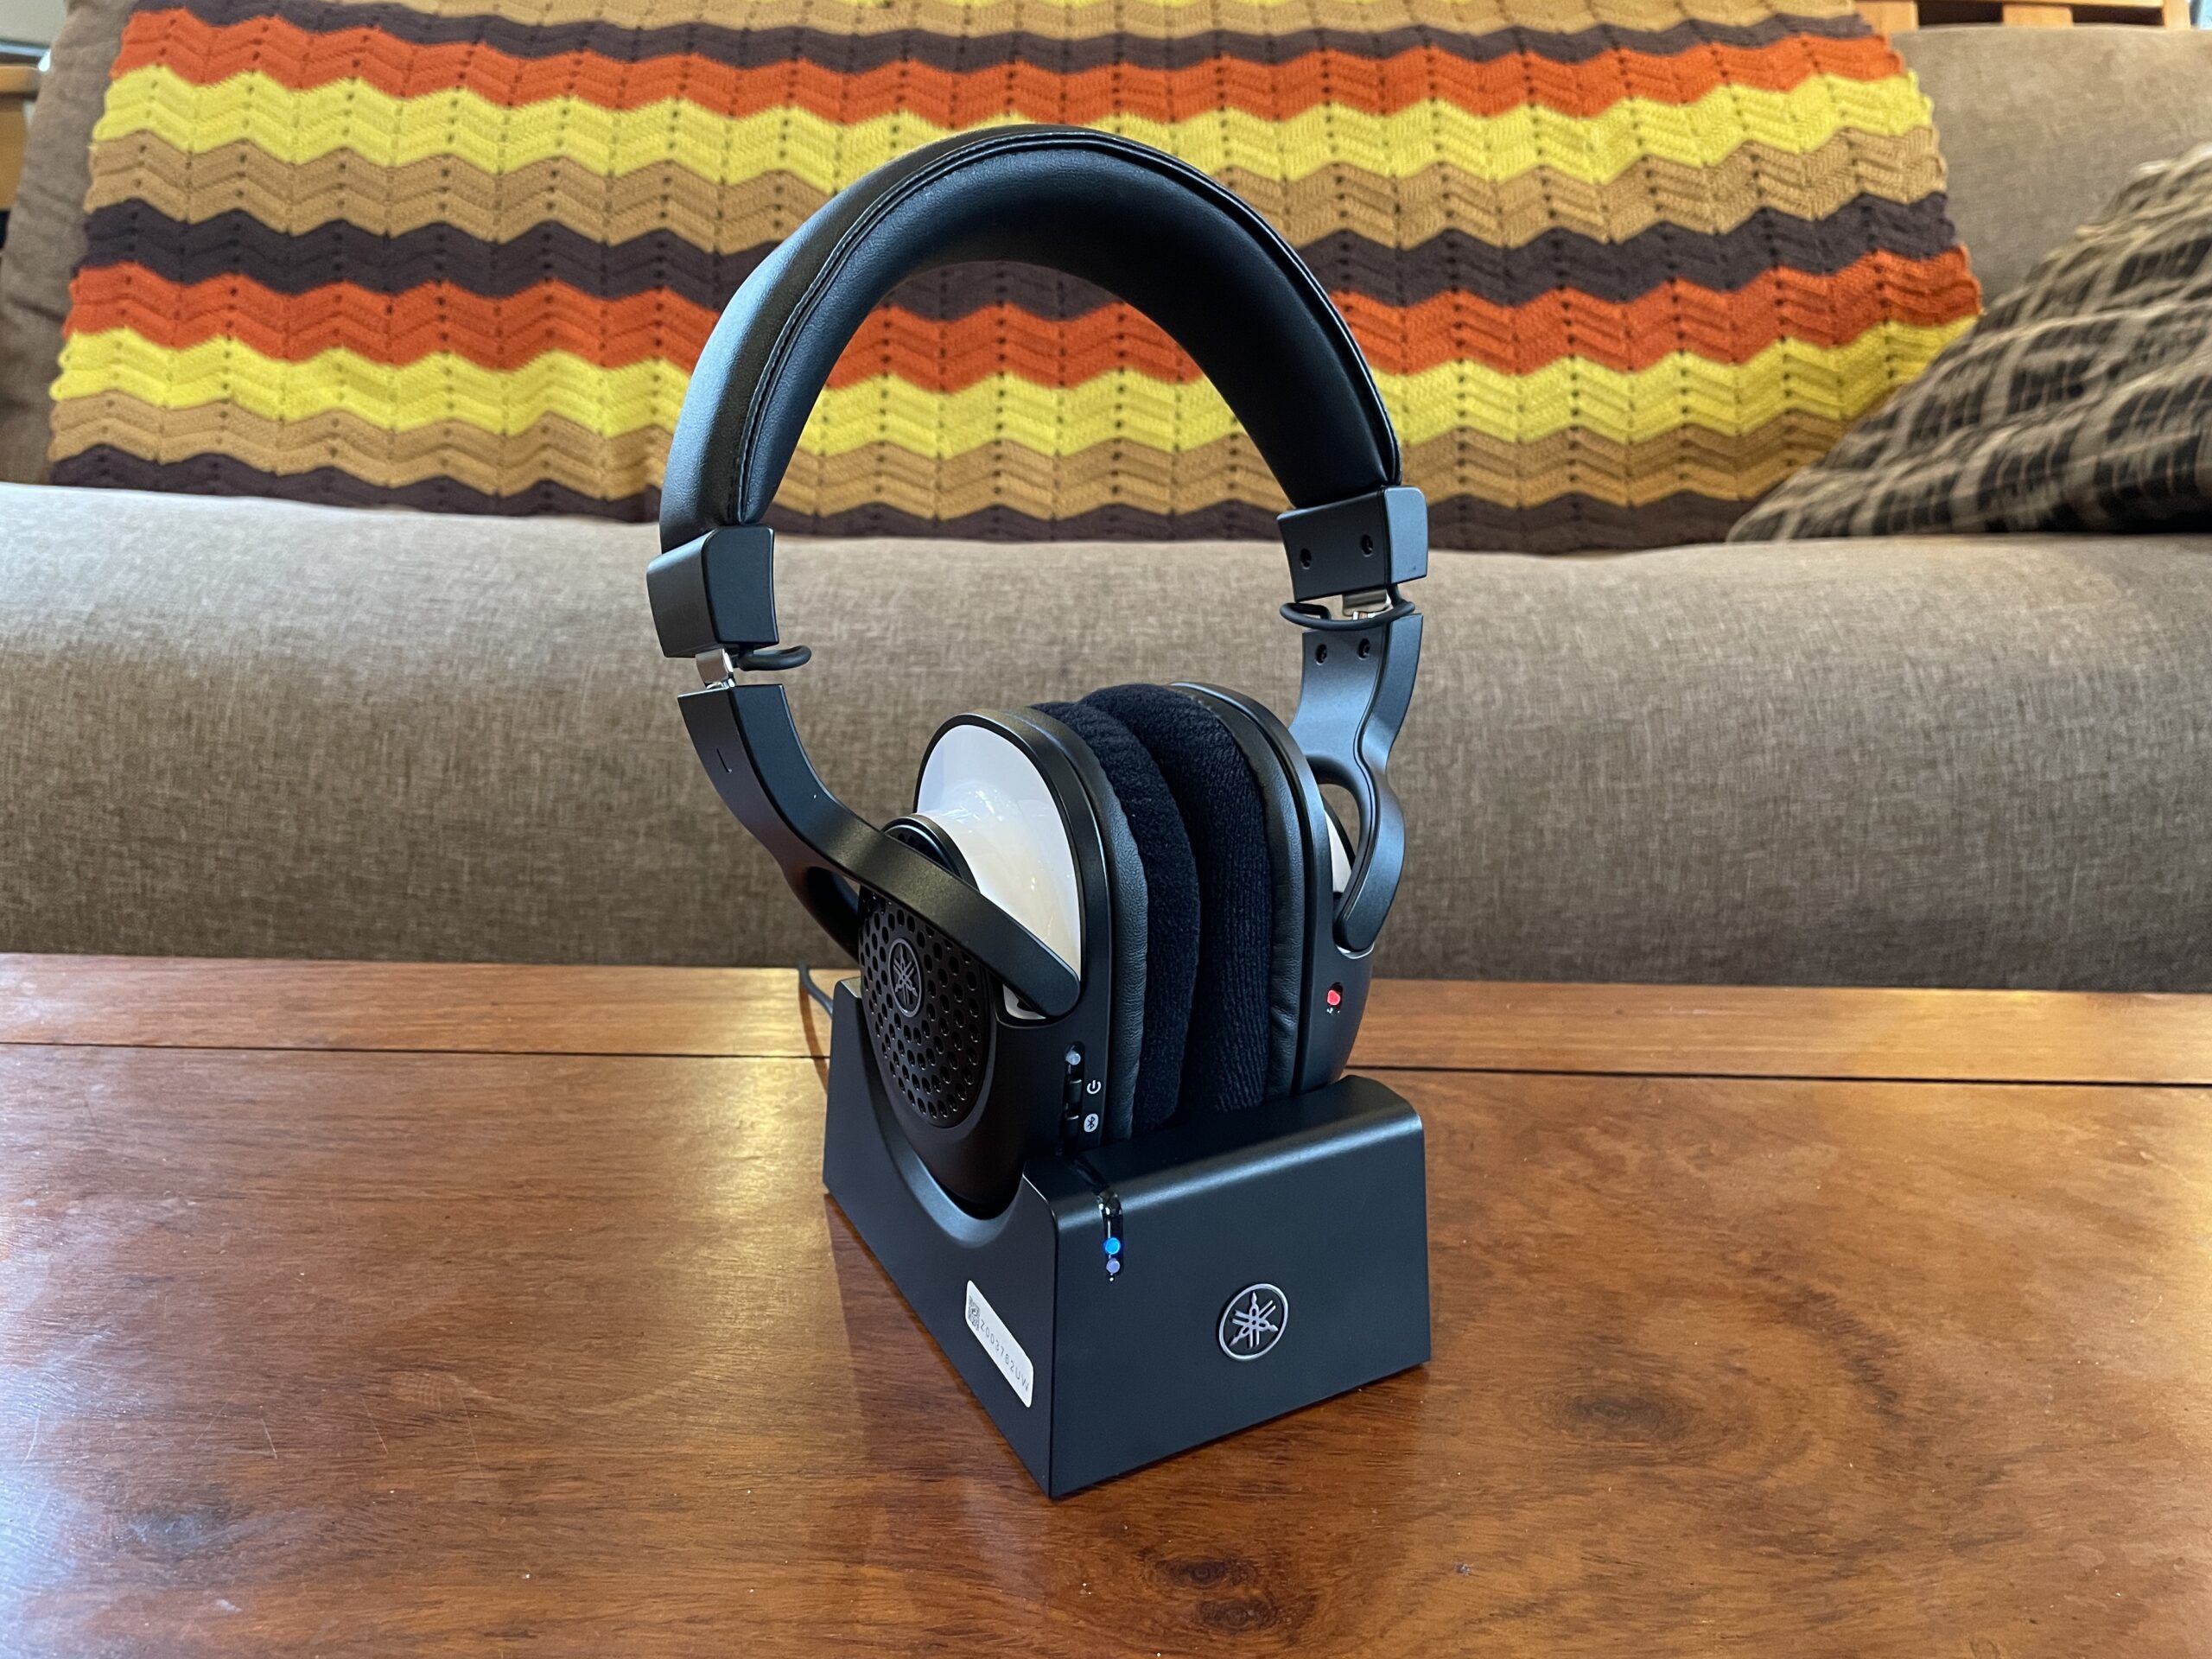 The Yamaha YH-WL500 wireless musicians headphone on a table in front of a colorful blanket